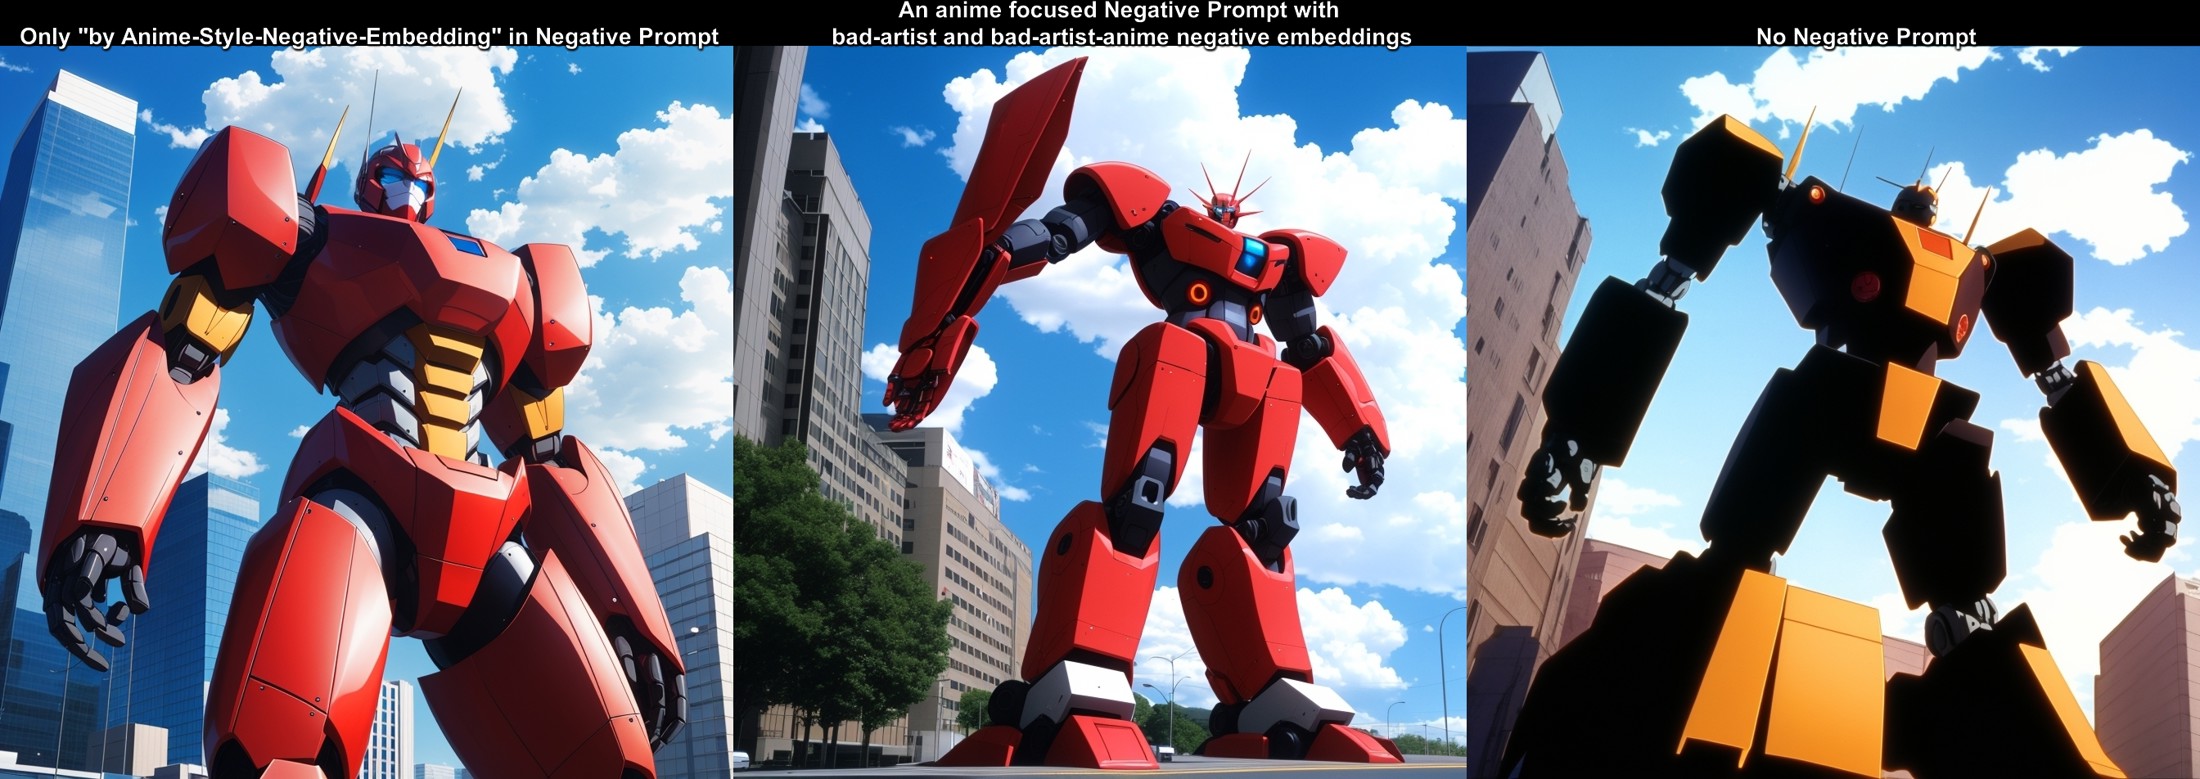 an anime screencap of a giant robot from an anime movie from the 80's, basic anime style